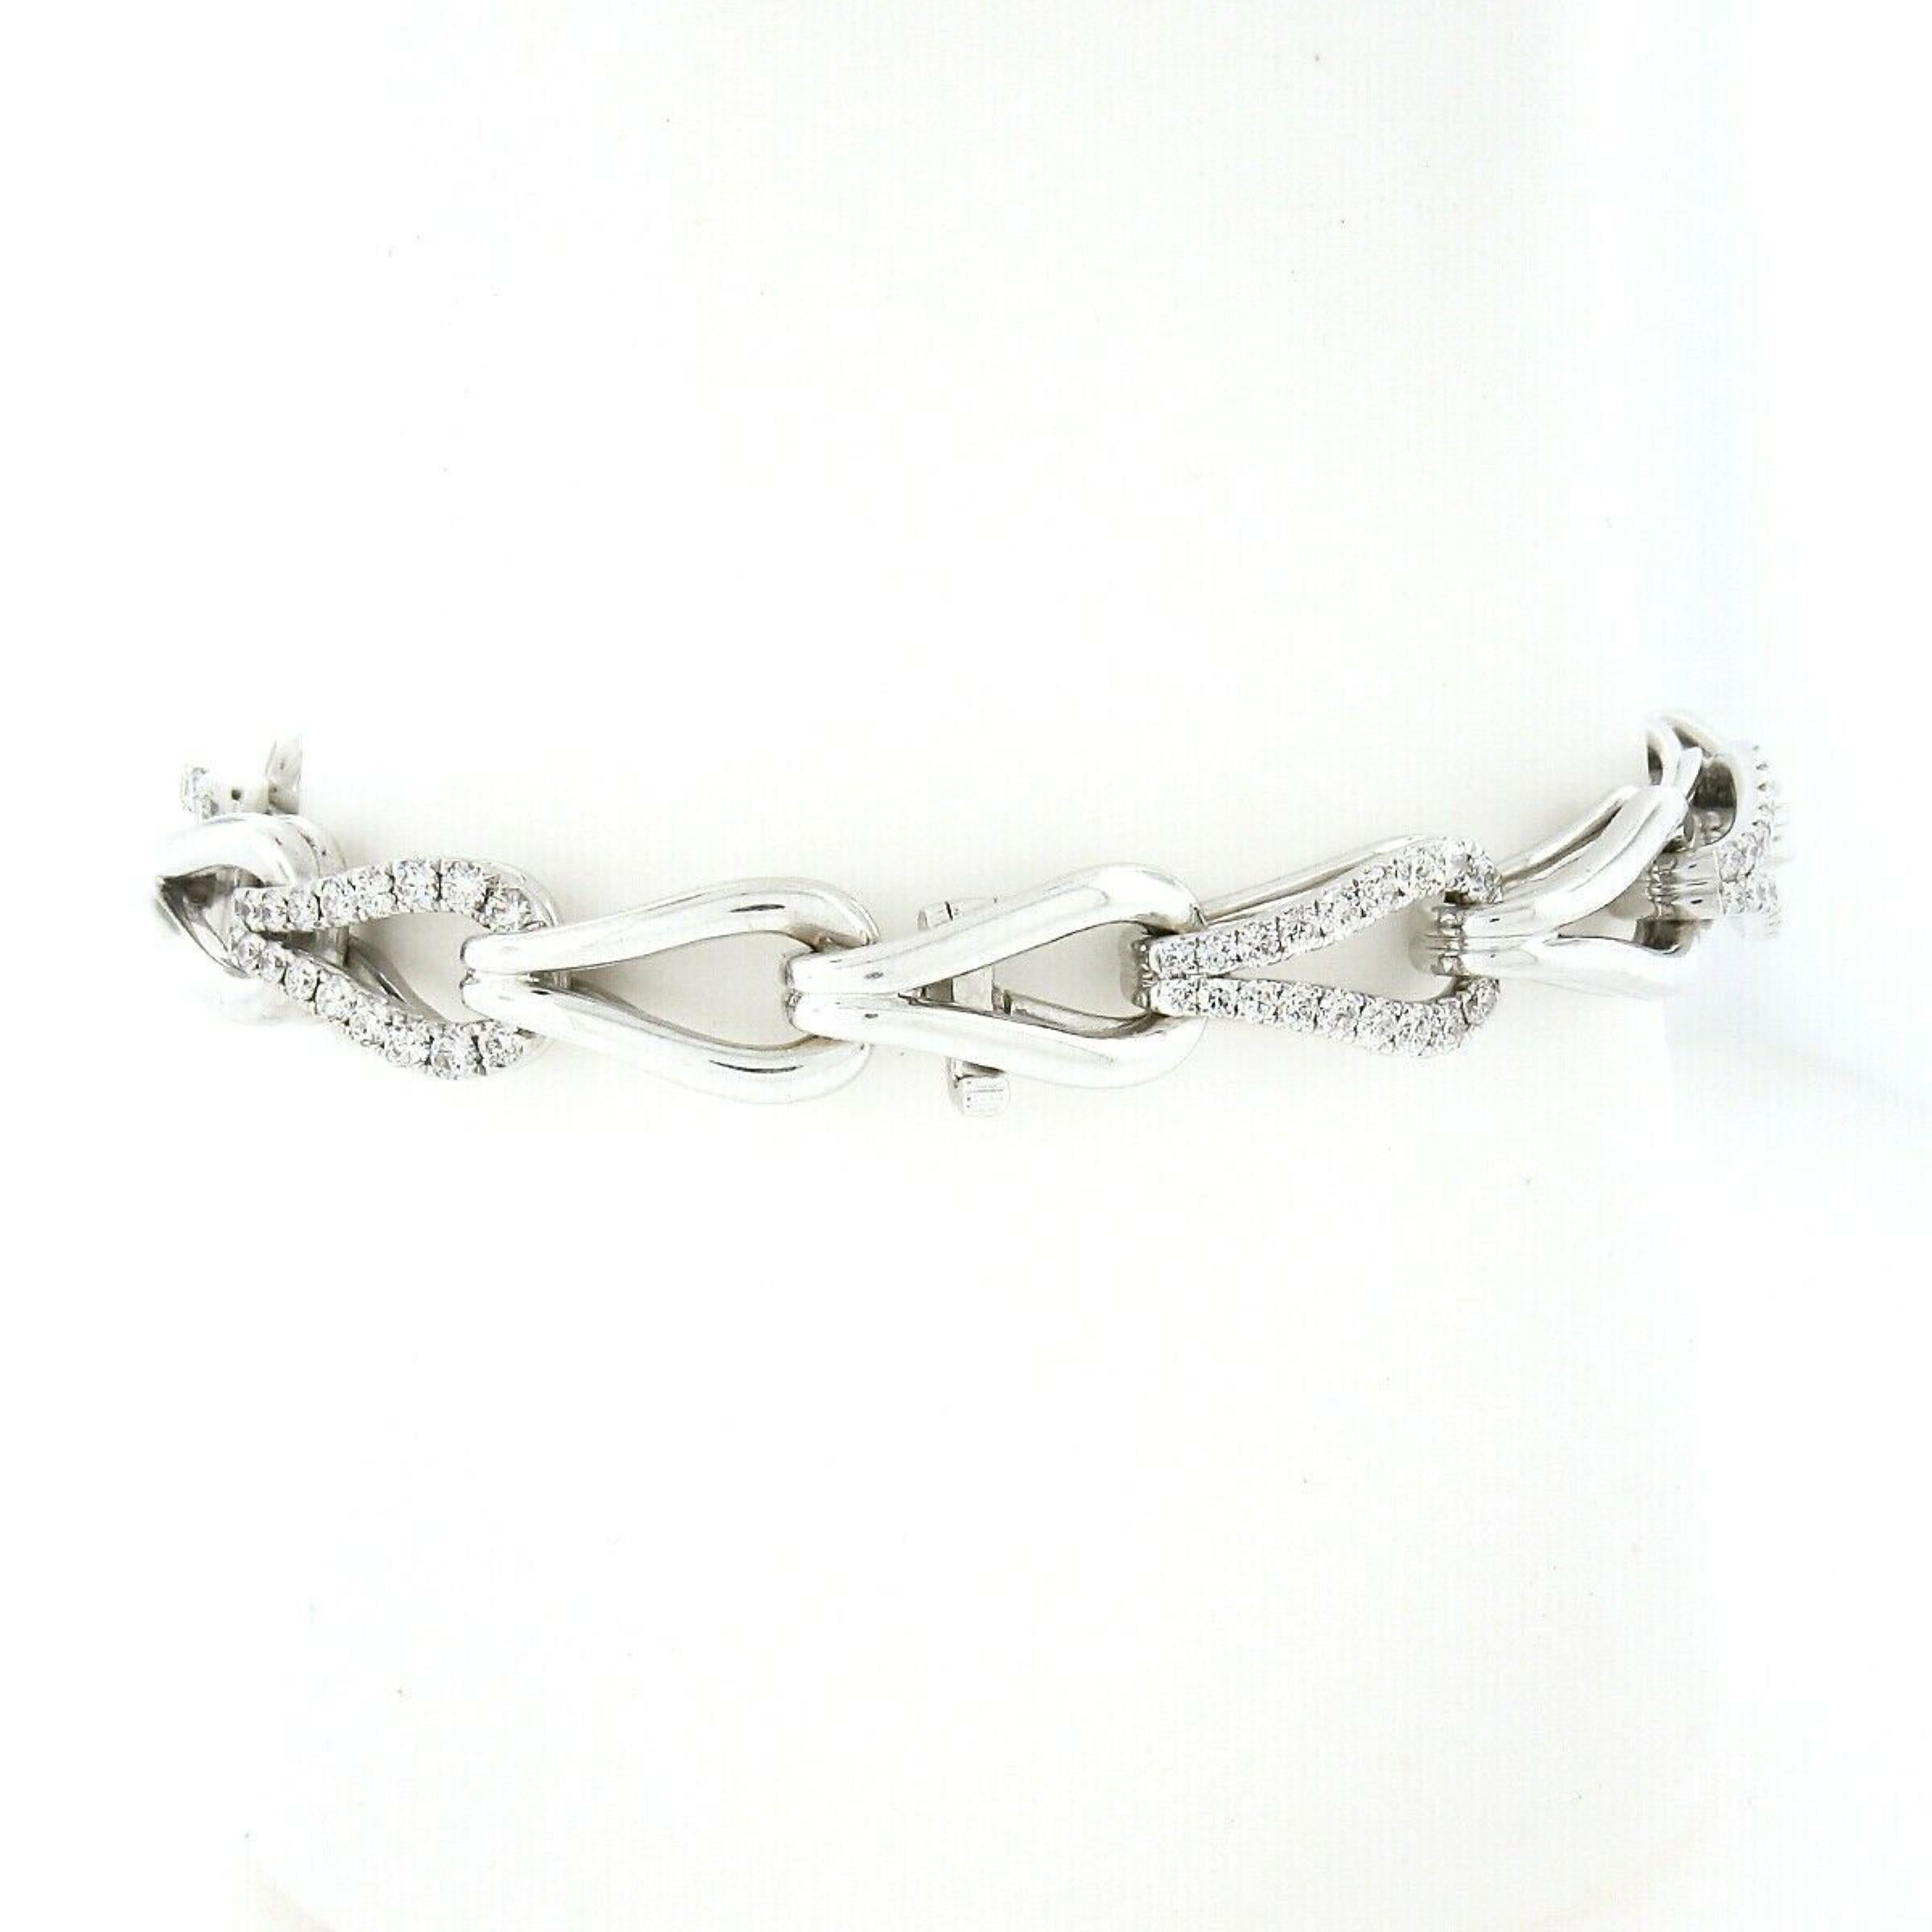 Here we have an absolutely gorgeous diamond bracelet designed by Charles Krypell that is crafted in solid 18k white gold. The bracelet is very well structured and features hook links that alternate with nice high-polished finish links and fine